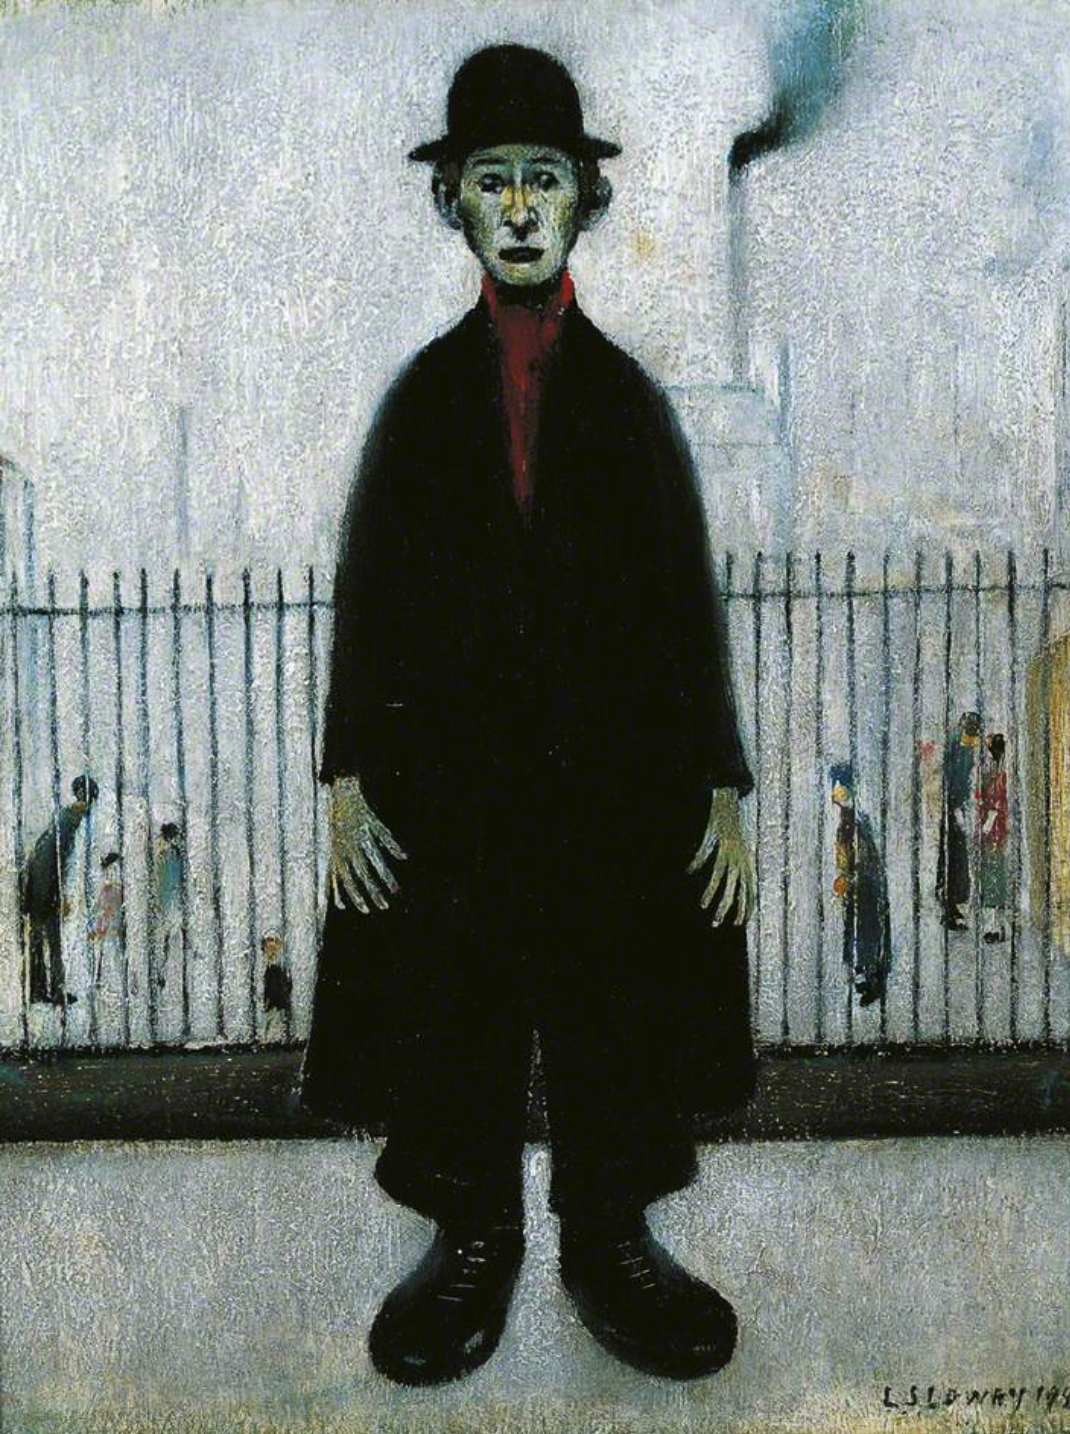 A Lancashire Cotton Worker (1944) by Laurence Stephen Lowry (1887 - 1976), English artist.